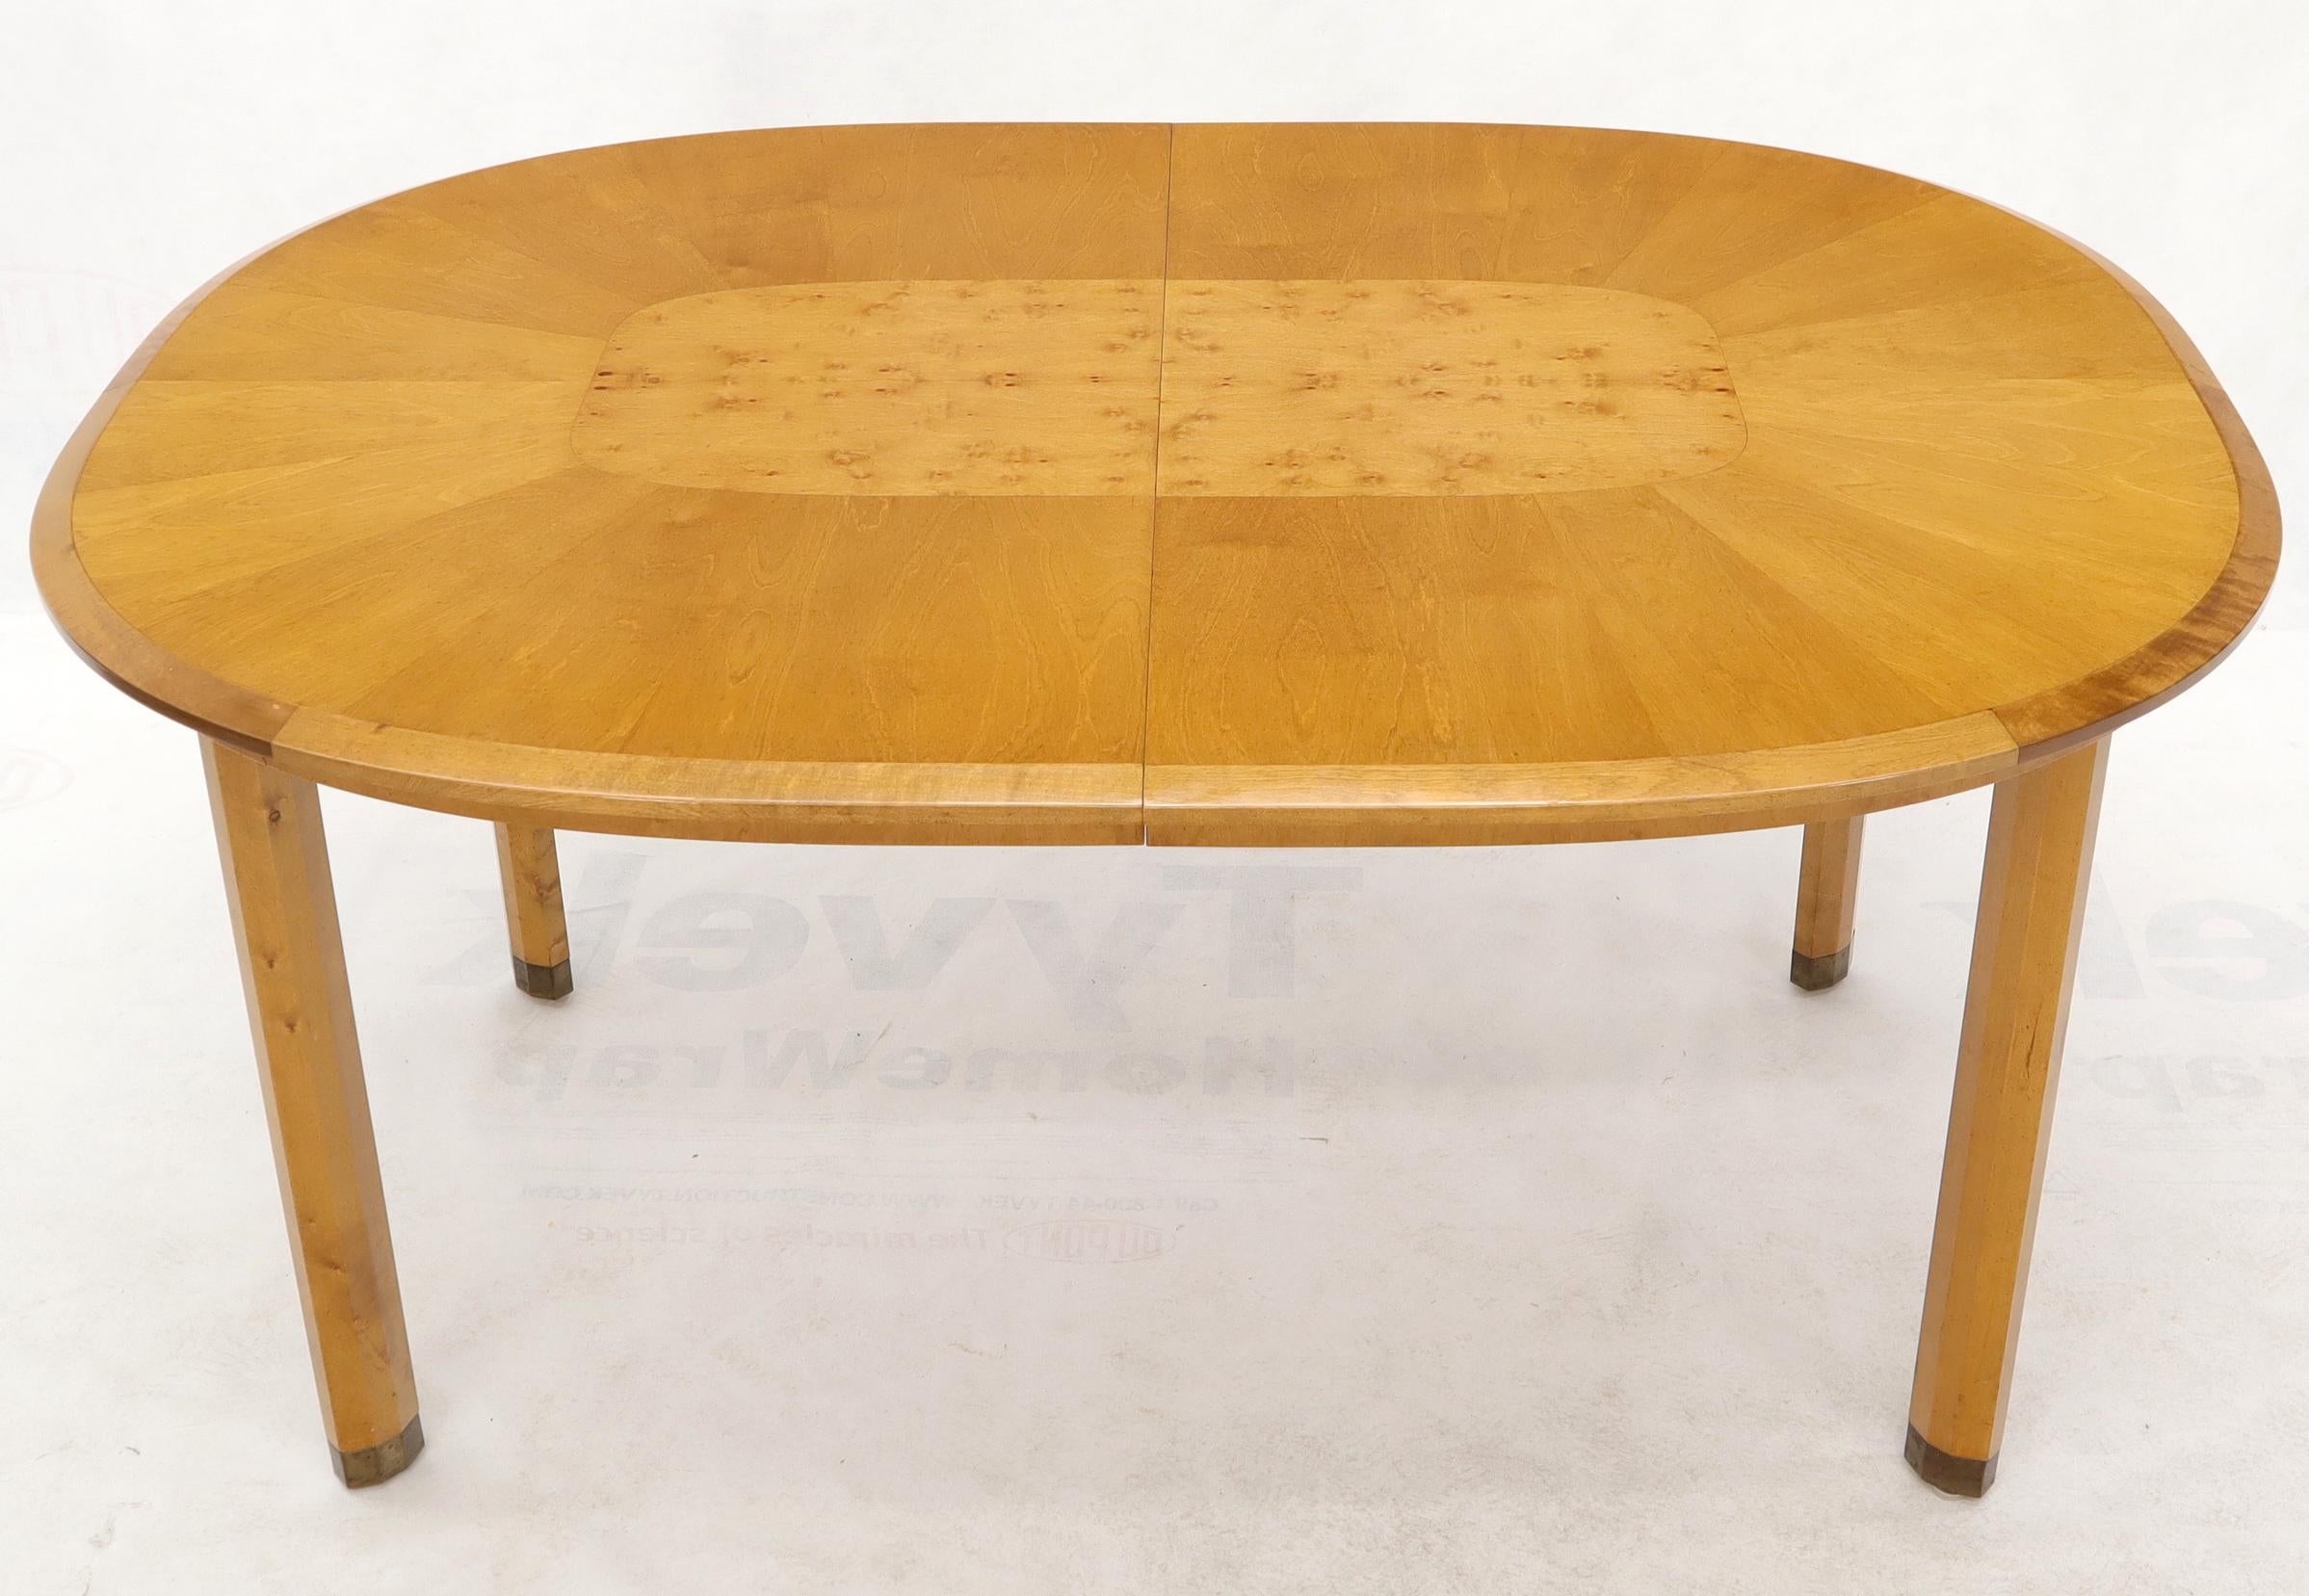 Blond Swedish Birch with Burl Oval Racetrack Dining Table Spece 1